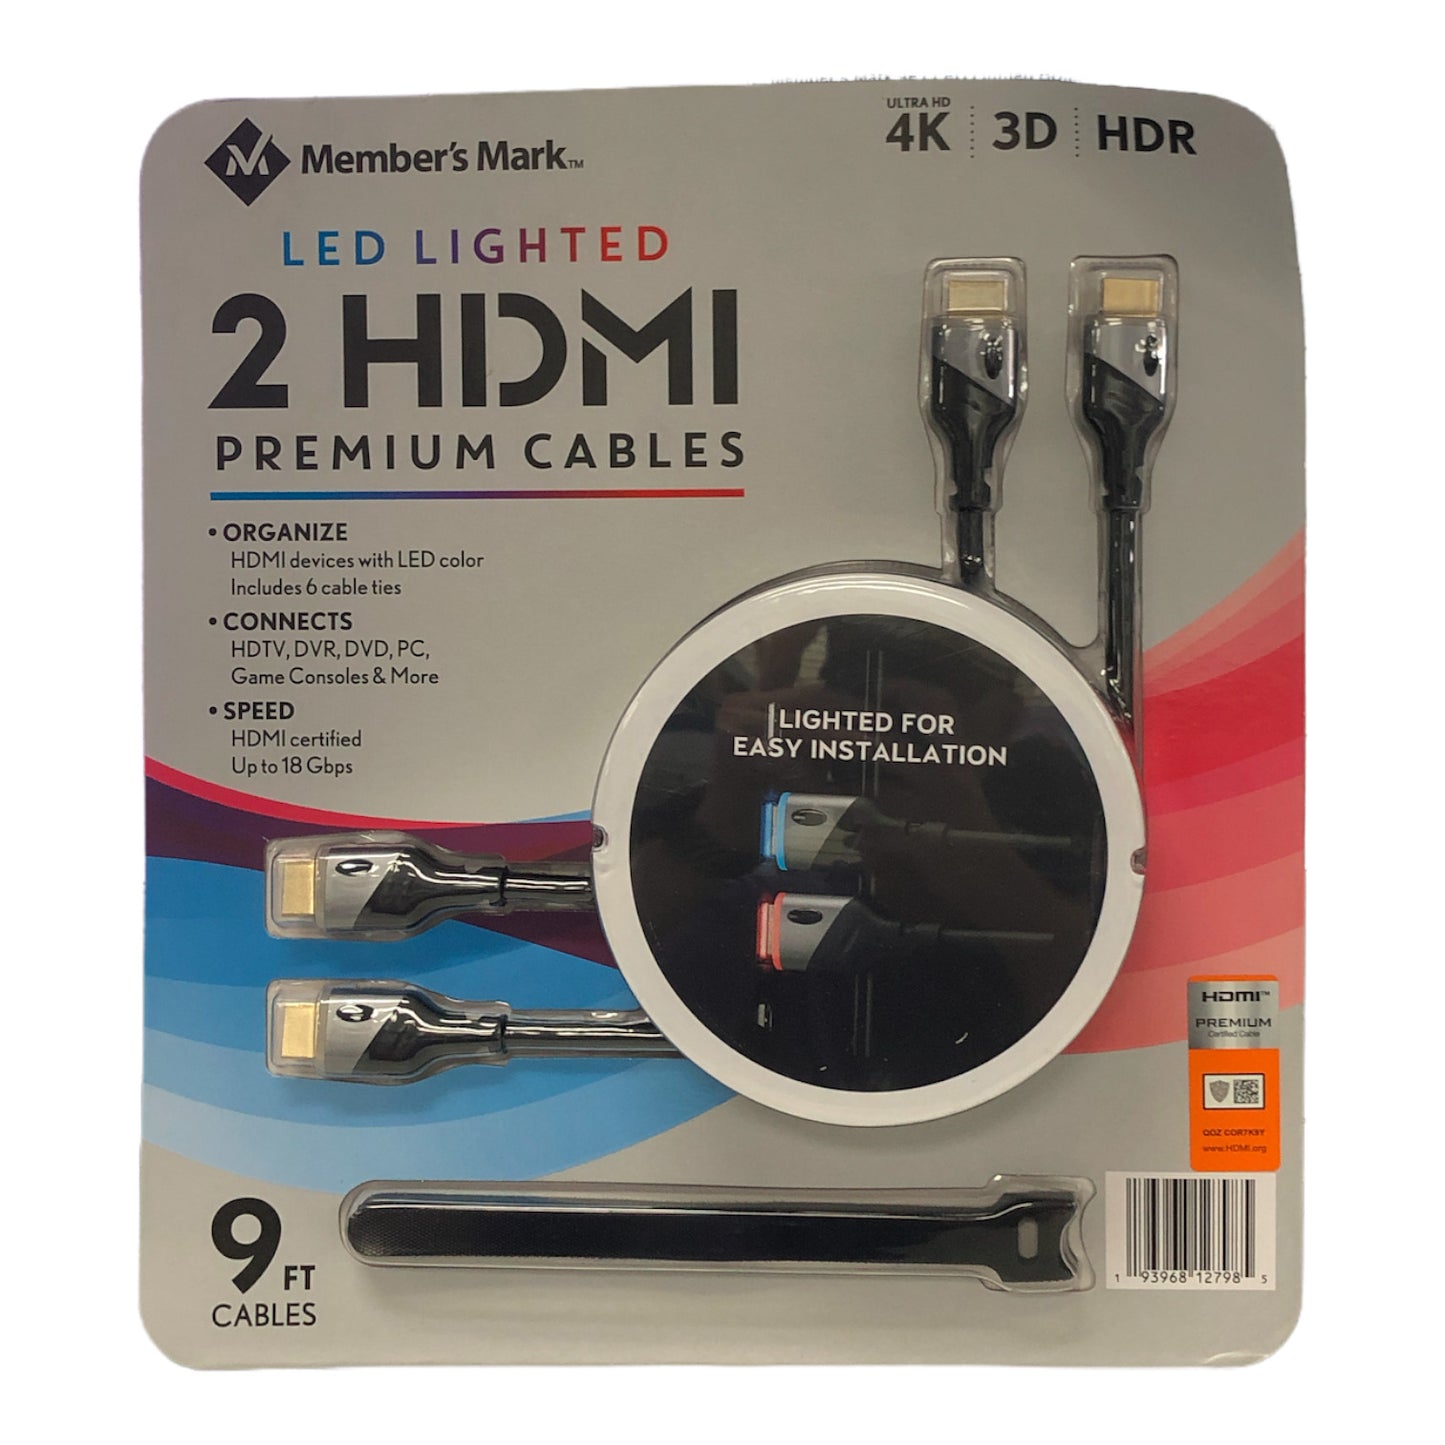 Member's Mark 9FT LED Lighted HDMI Premium Cables, 2 Pack